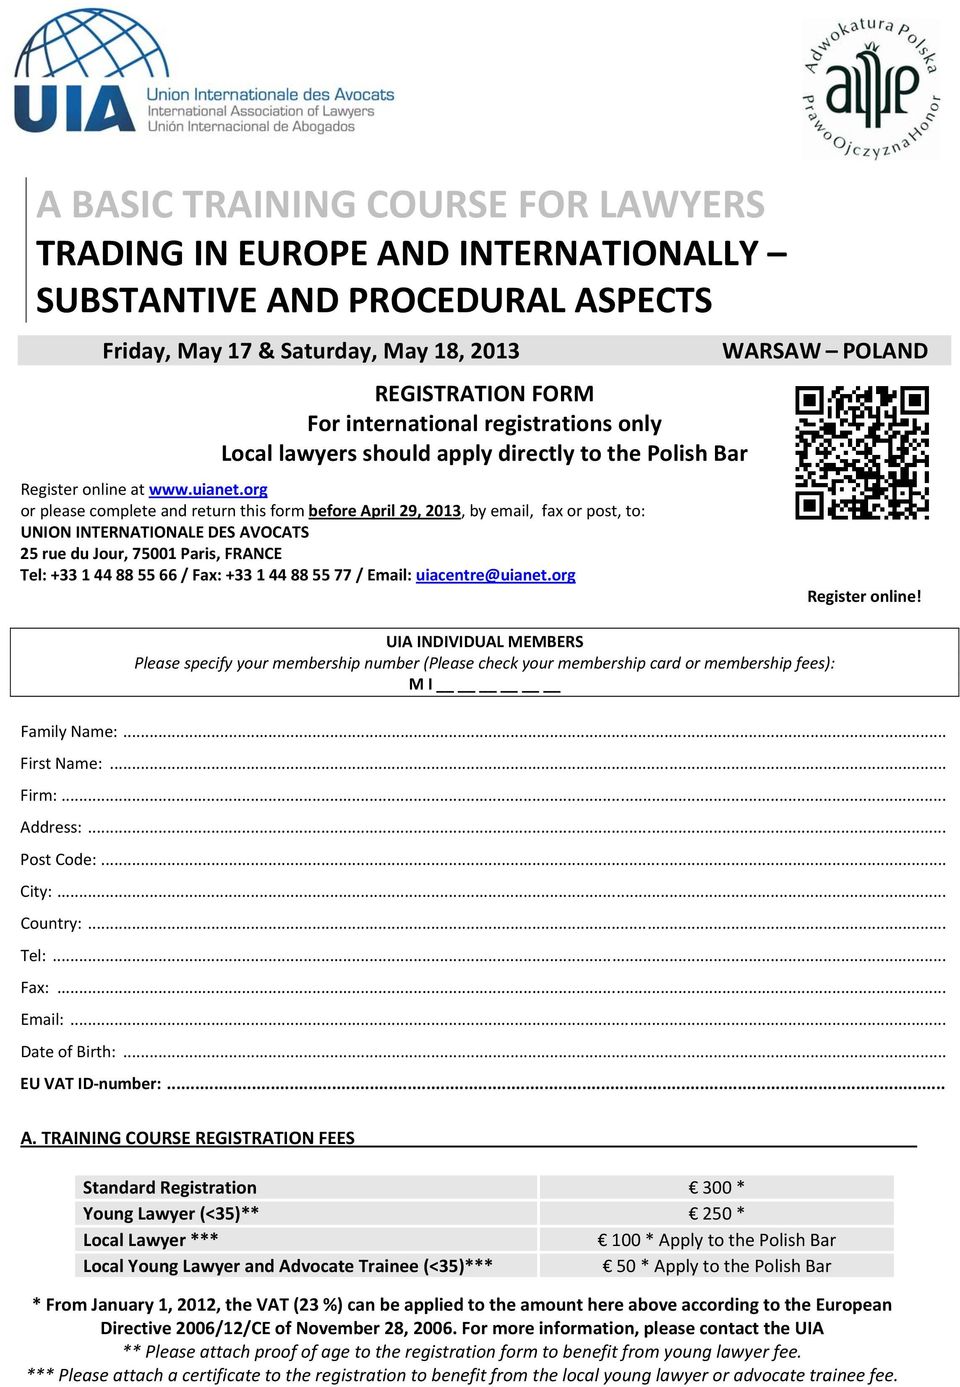 org or please complete and return this form before April 29, 2013, by email, fax or post, to: UNION INTERNATIONALE DES AVOCATS 25 rue du Jour, 75001 Paris, FRANCE Tel: +33 1 44 88 55 66 / Fax: +33 1